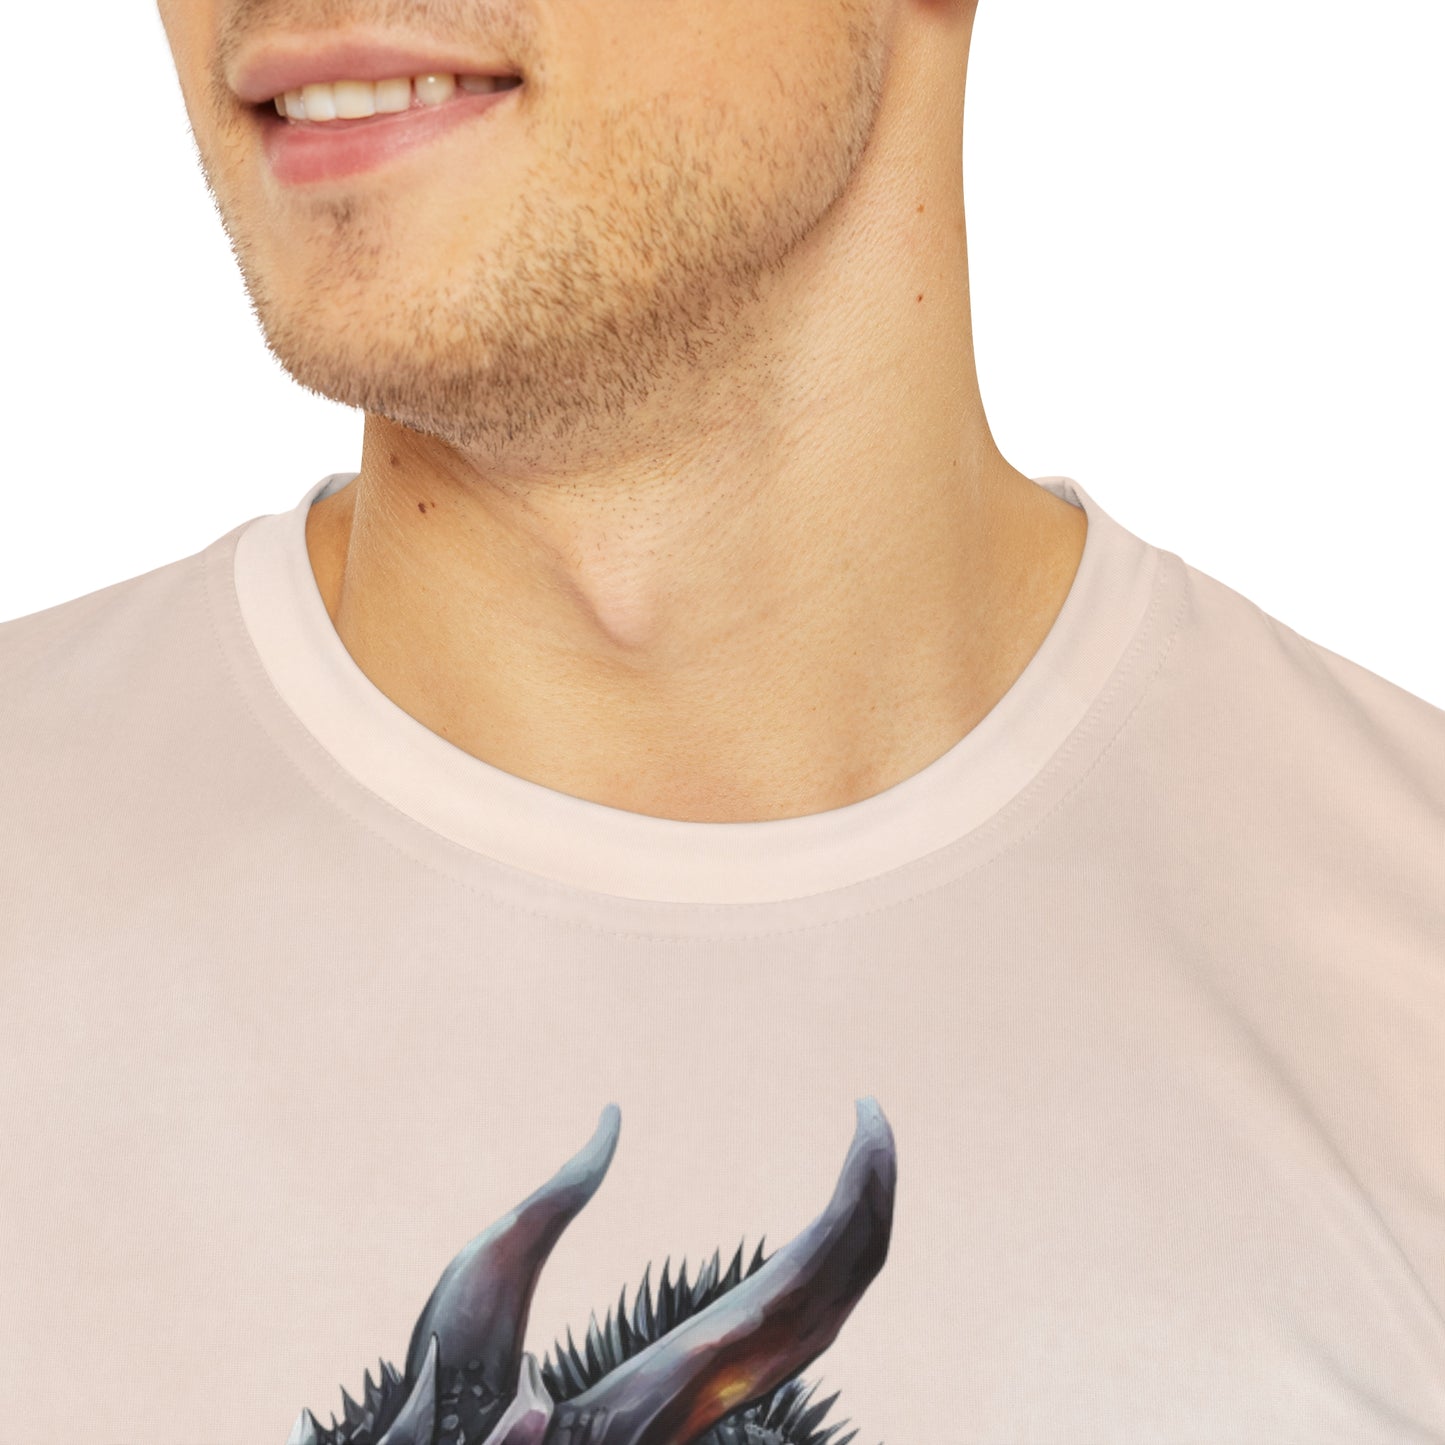 Dragon & Skull on Watercolor Background T-shirt